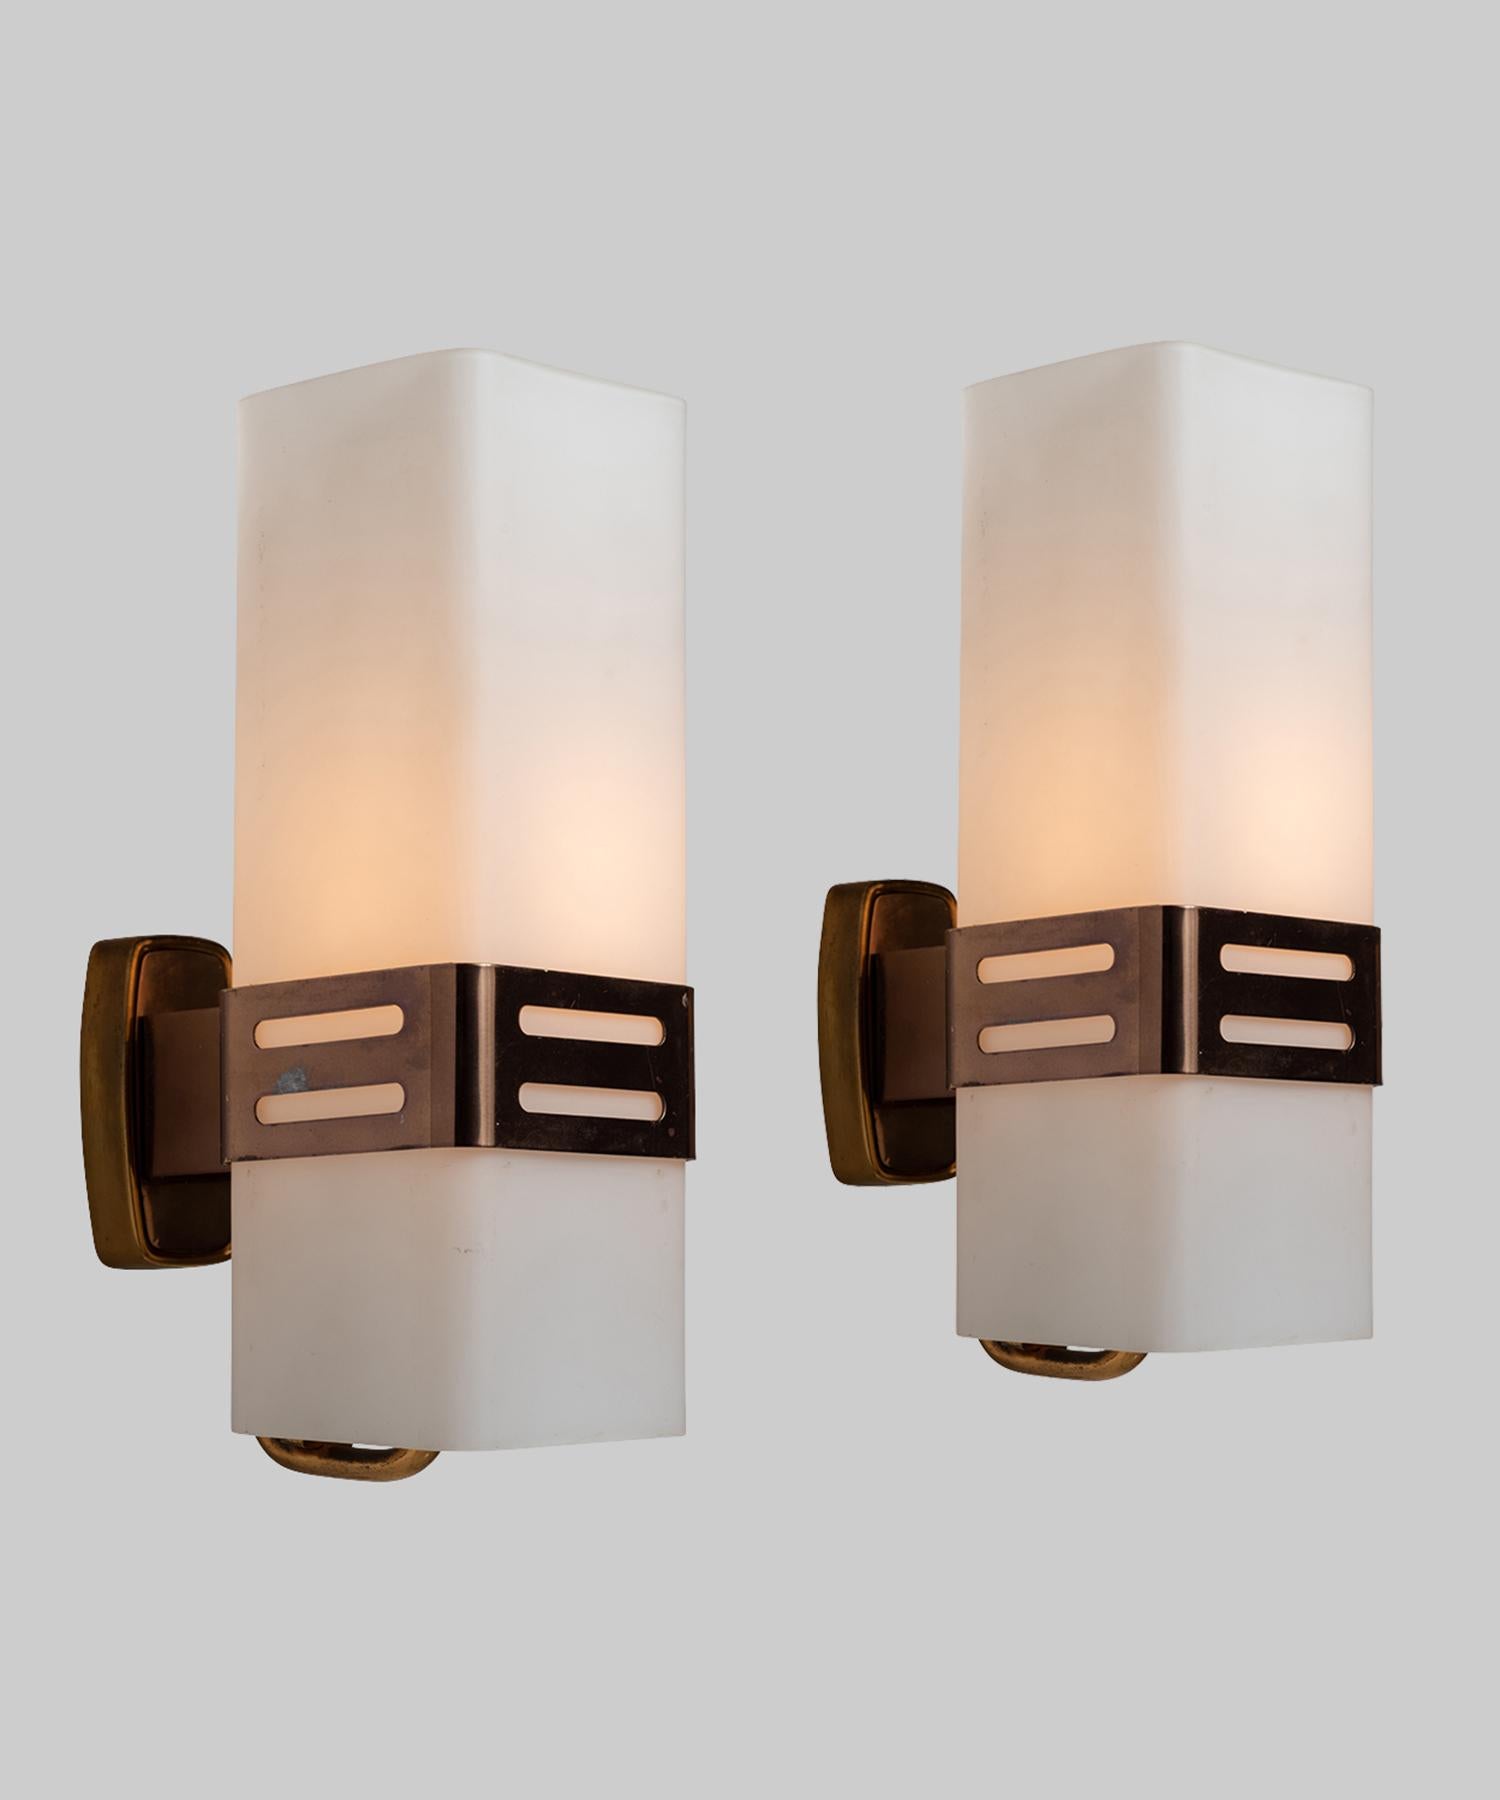 Brass structure with white opaline glass diffuser.